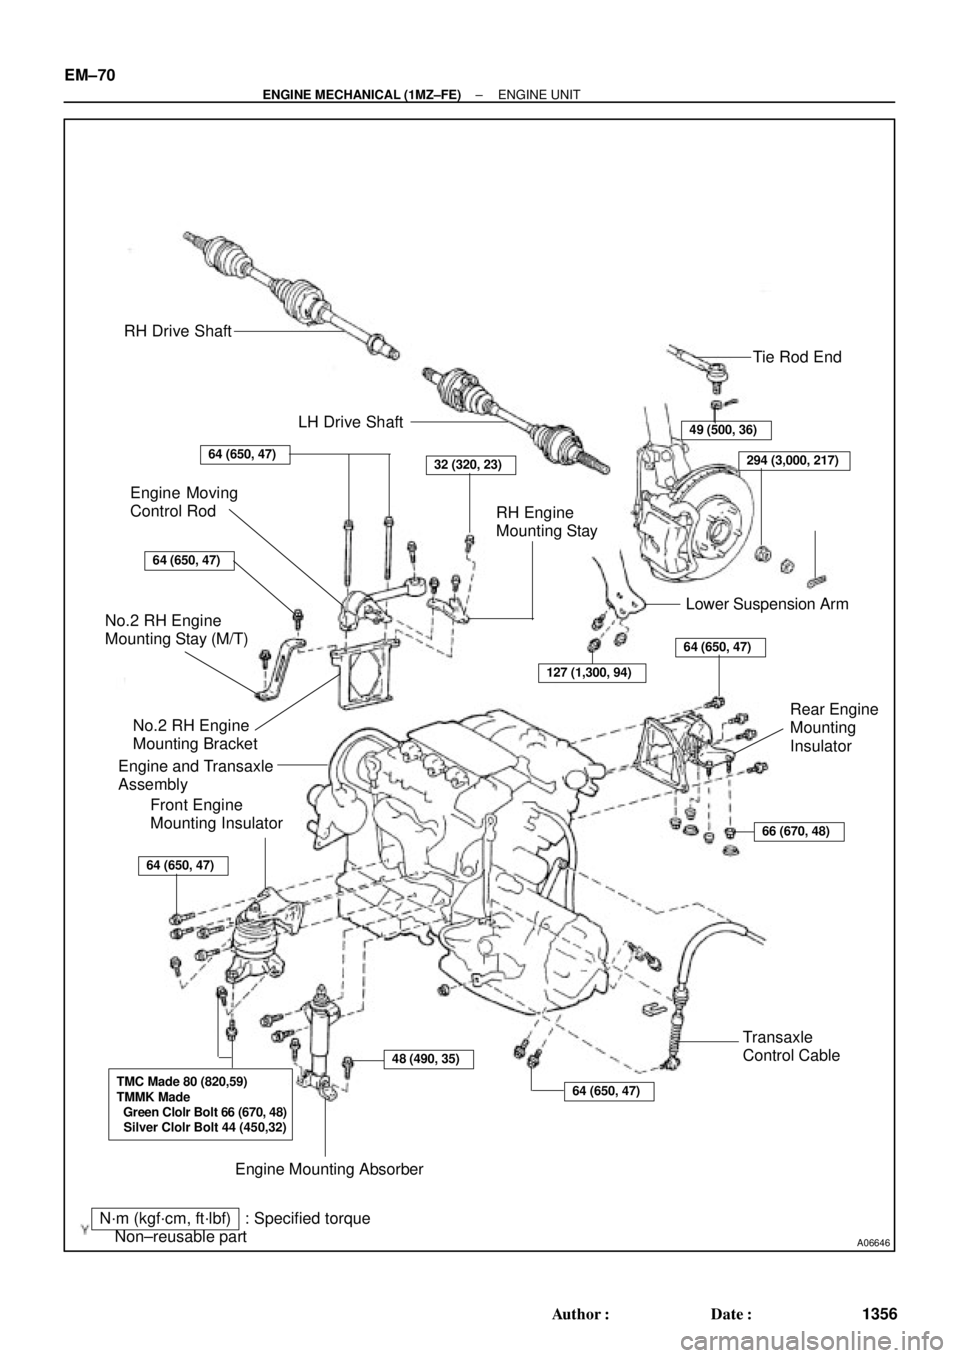 TOYOTA CAMRY 1999  Service Repair Manual A06646
RH Drive Shaft
LH Drive Shaft
Tie Rod End
49 (500, 36)
294 (3,000, 217)64 (650, 47)32 (320, 23)
RH Engine
Mounting Stay
Lower Suspension Arm Engine Moving
Control Rod
64 (650, 47)
127 (1,300, 9